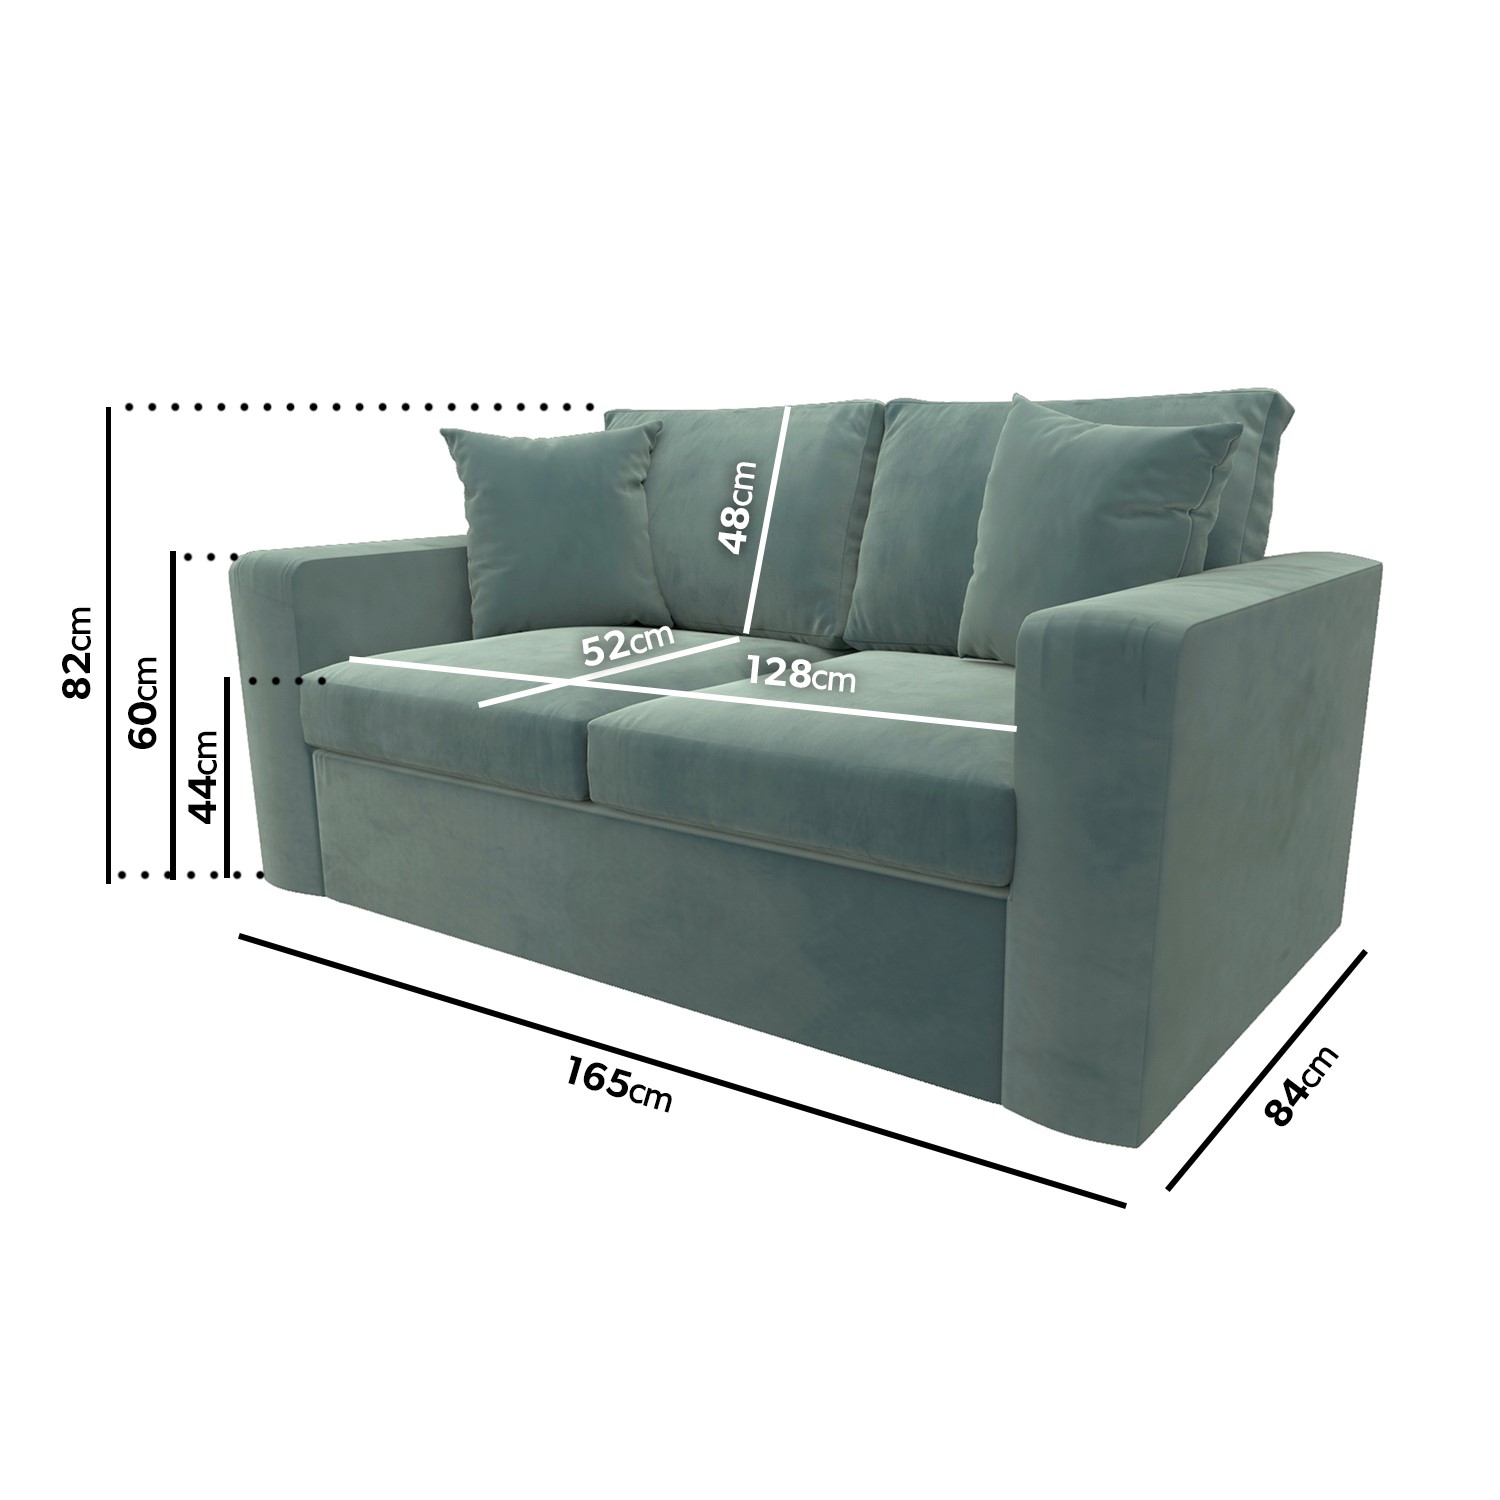 Read more about Mint green velvet pull out sofa bed seats 2 layton